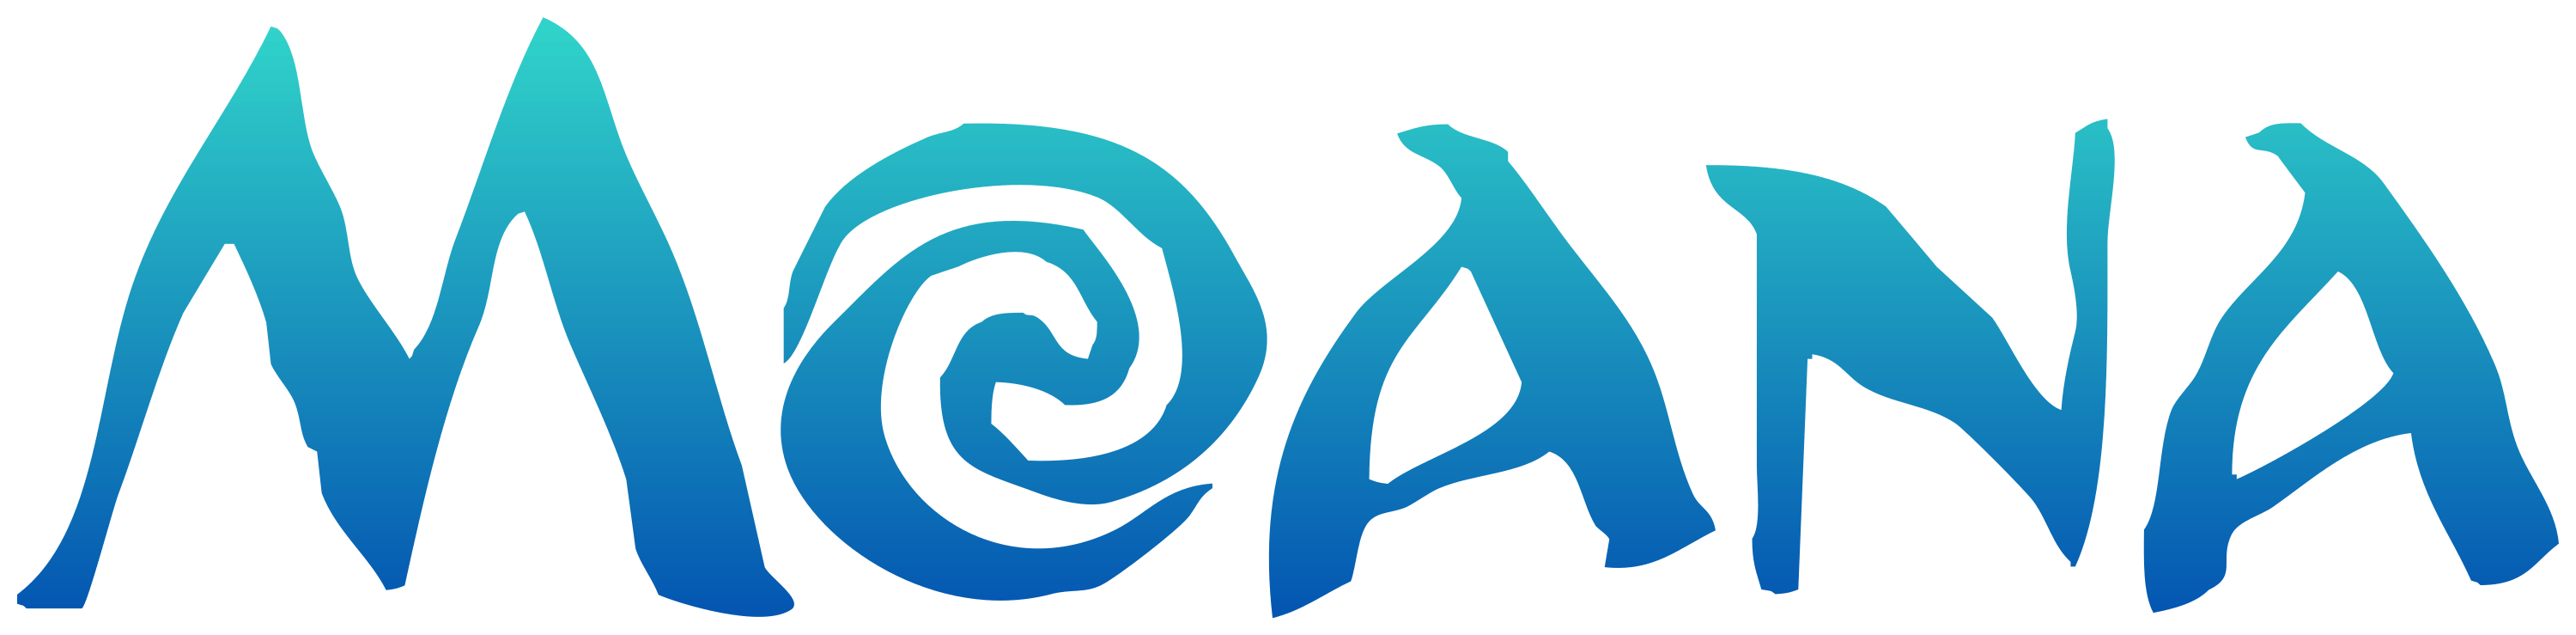 Moana Logo - Moana Transparent PNG Pictures - Free Icons and PNG Backgrounds